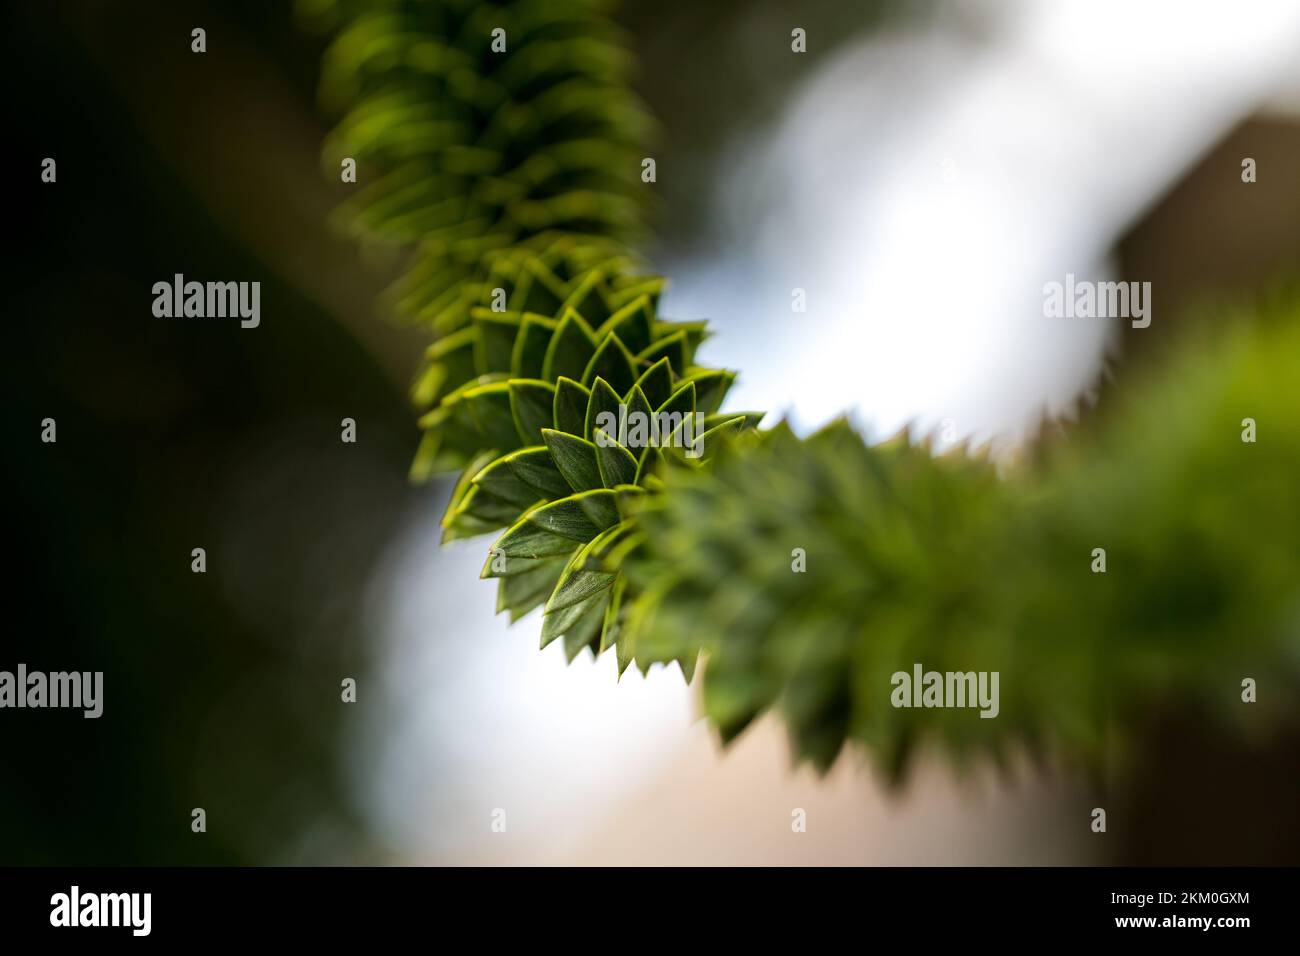 Living fossils. Green thorny leaves of araucaria araucana or monkey tail tree with sharp needle-like leaves and spikes of exotic plant. Stock Photo